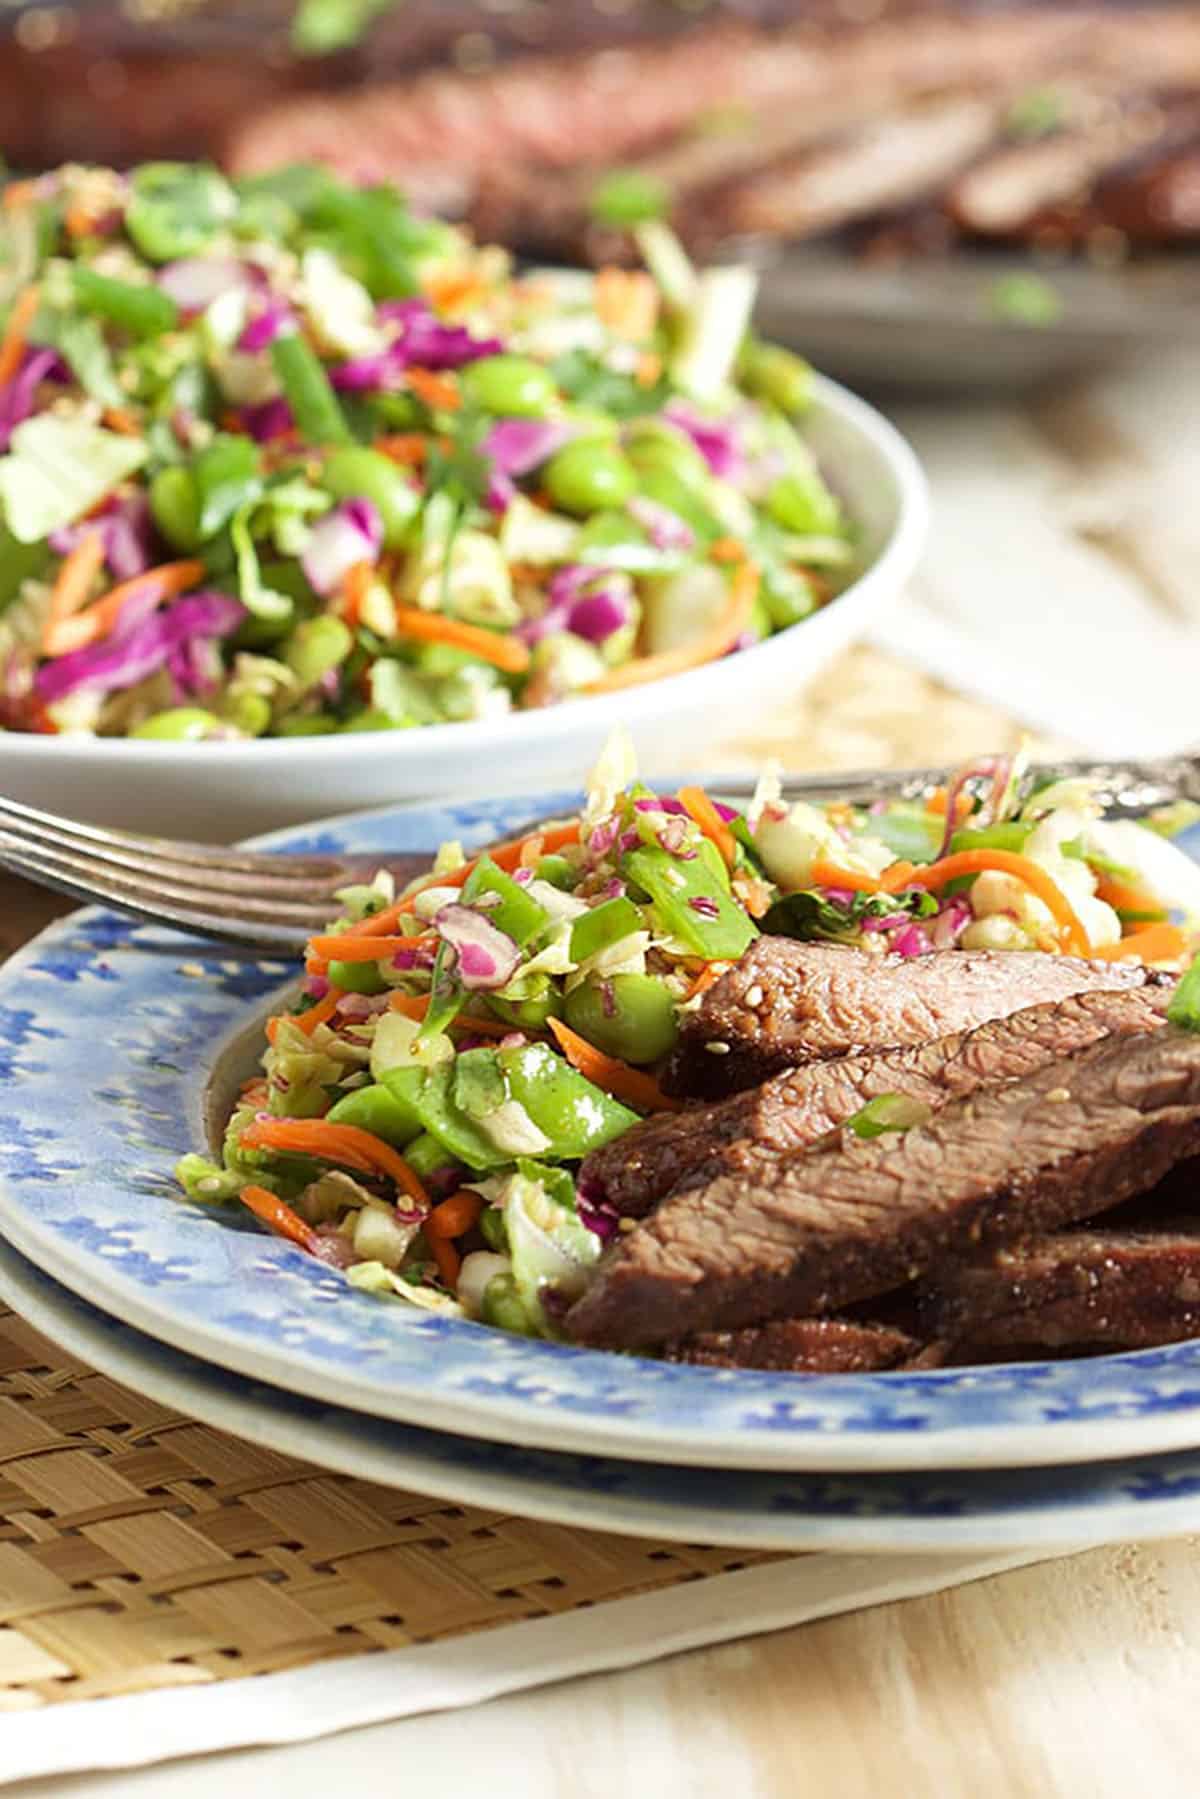 Asian coleslaw plated with sliced steak on a blue plate.